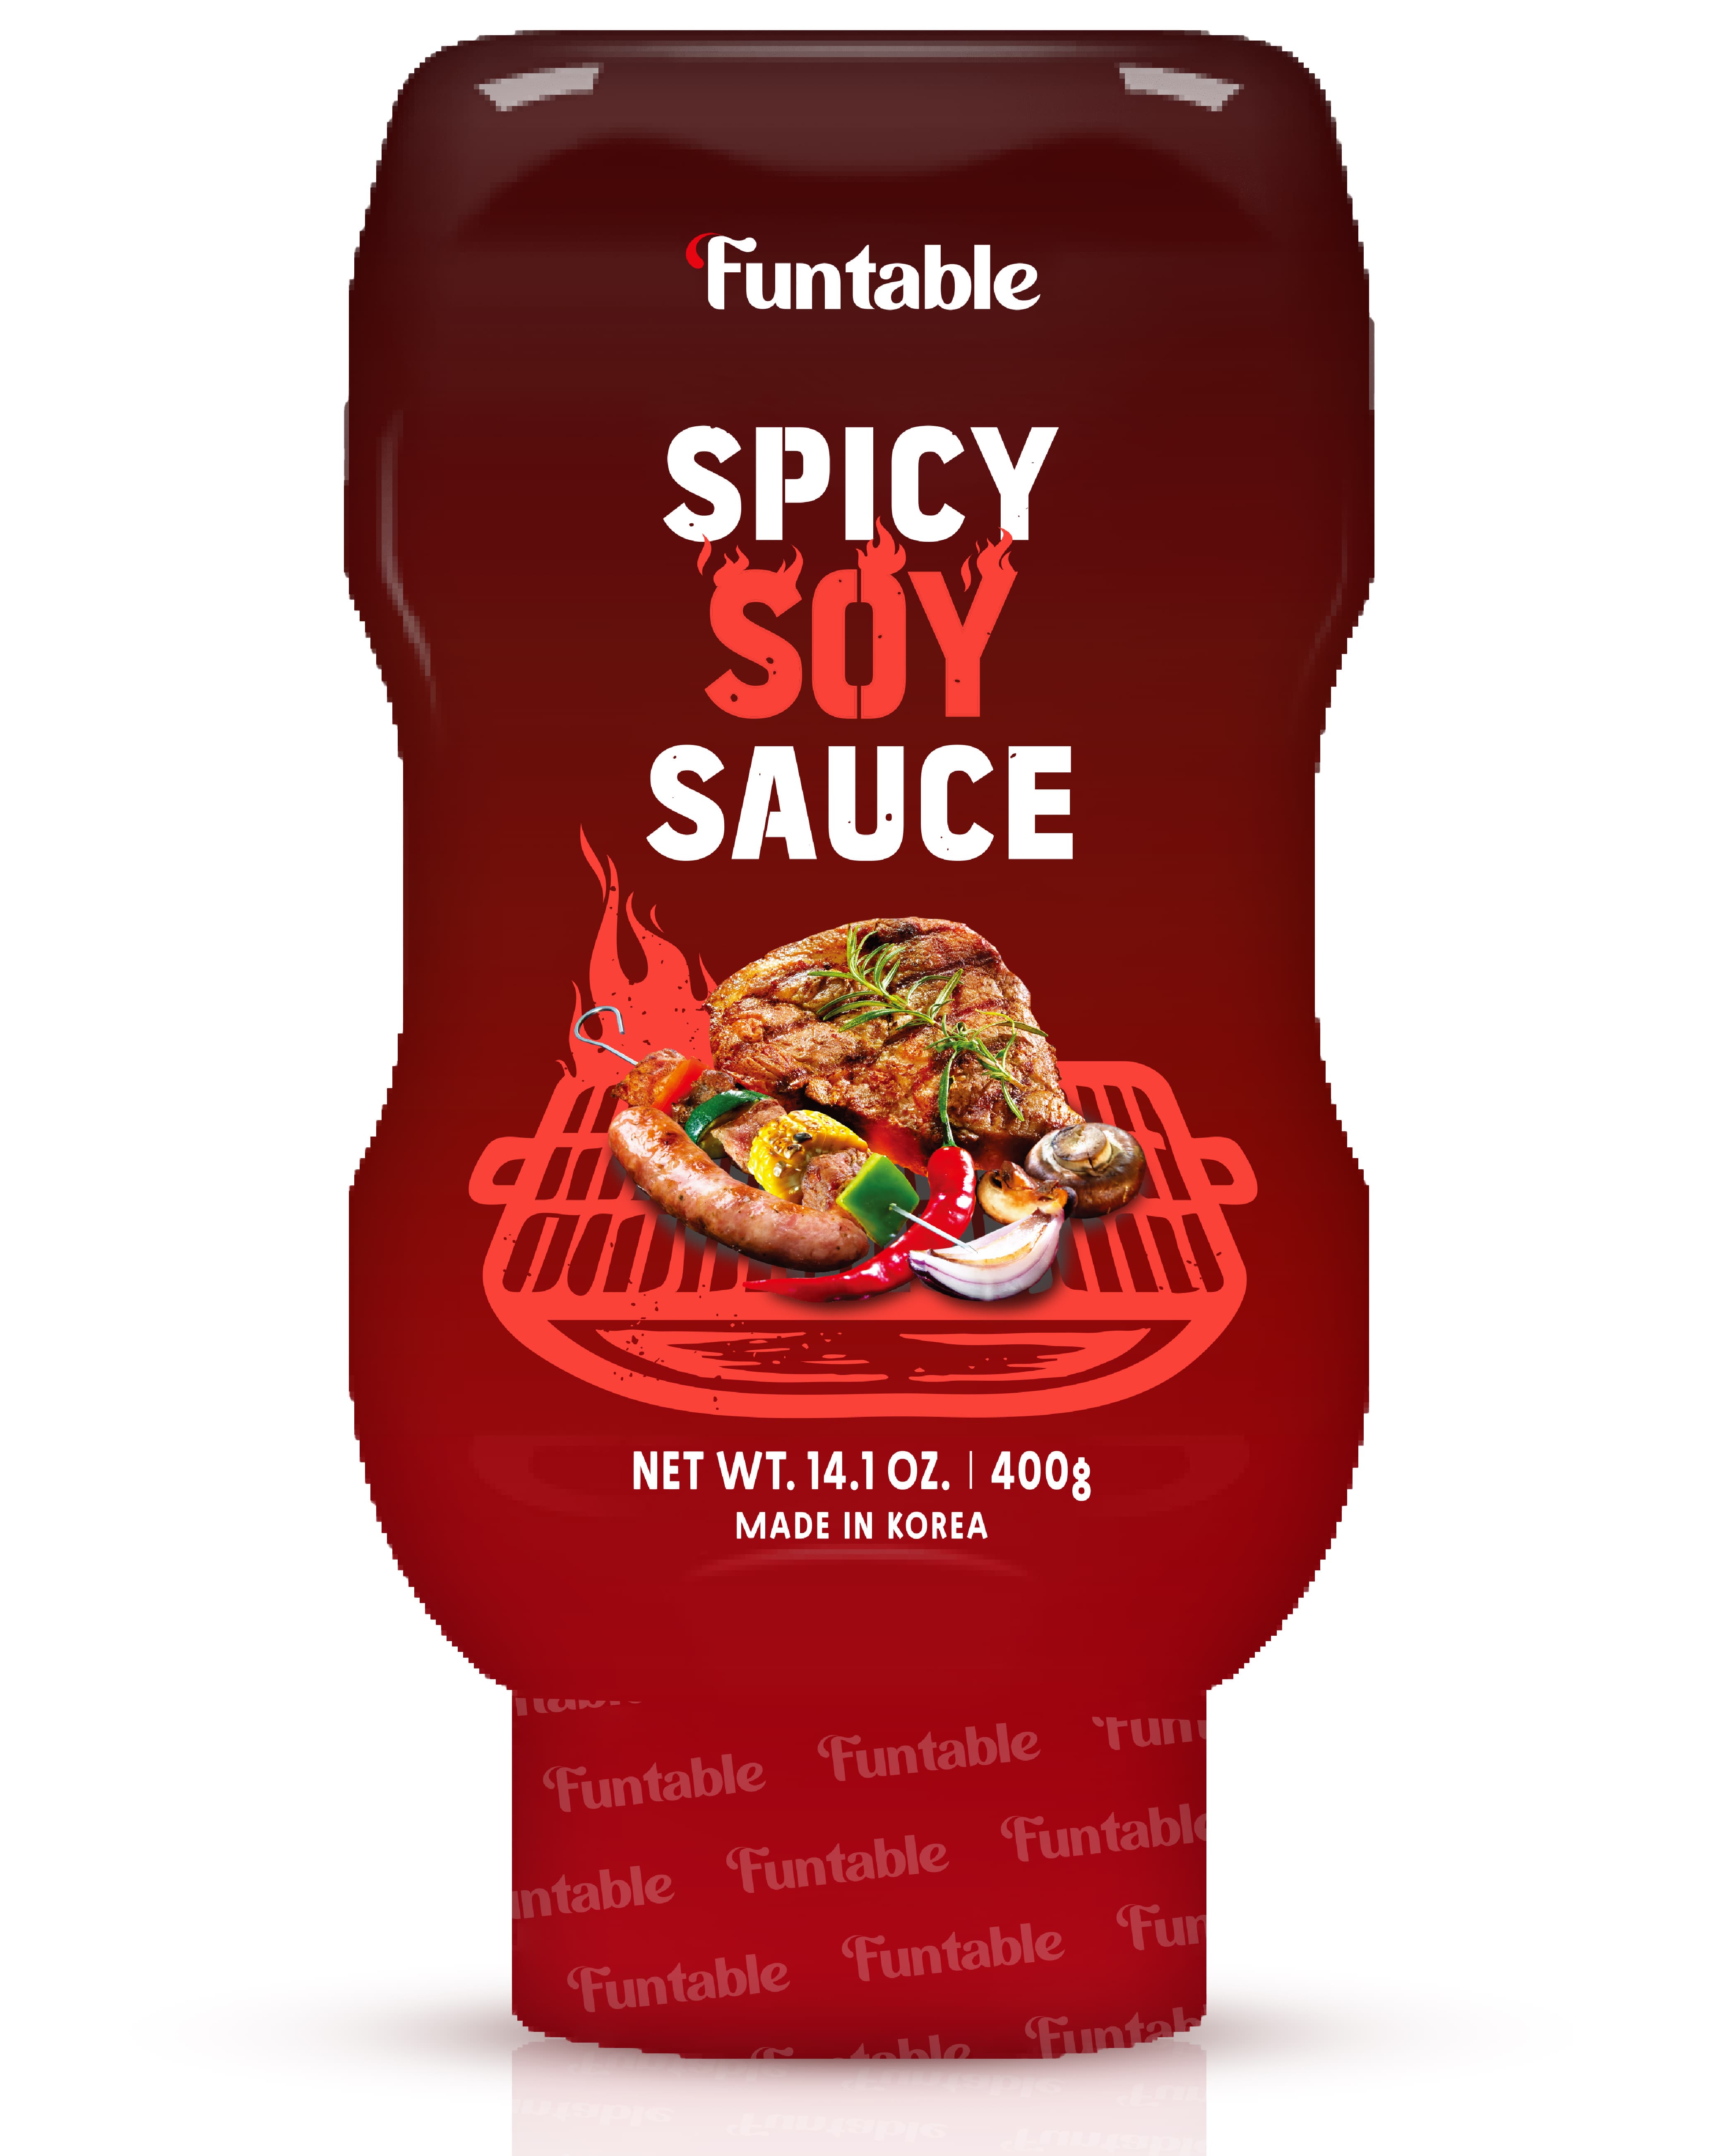 Spicy Soy Sauce